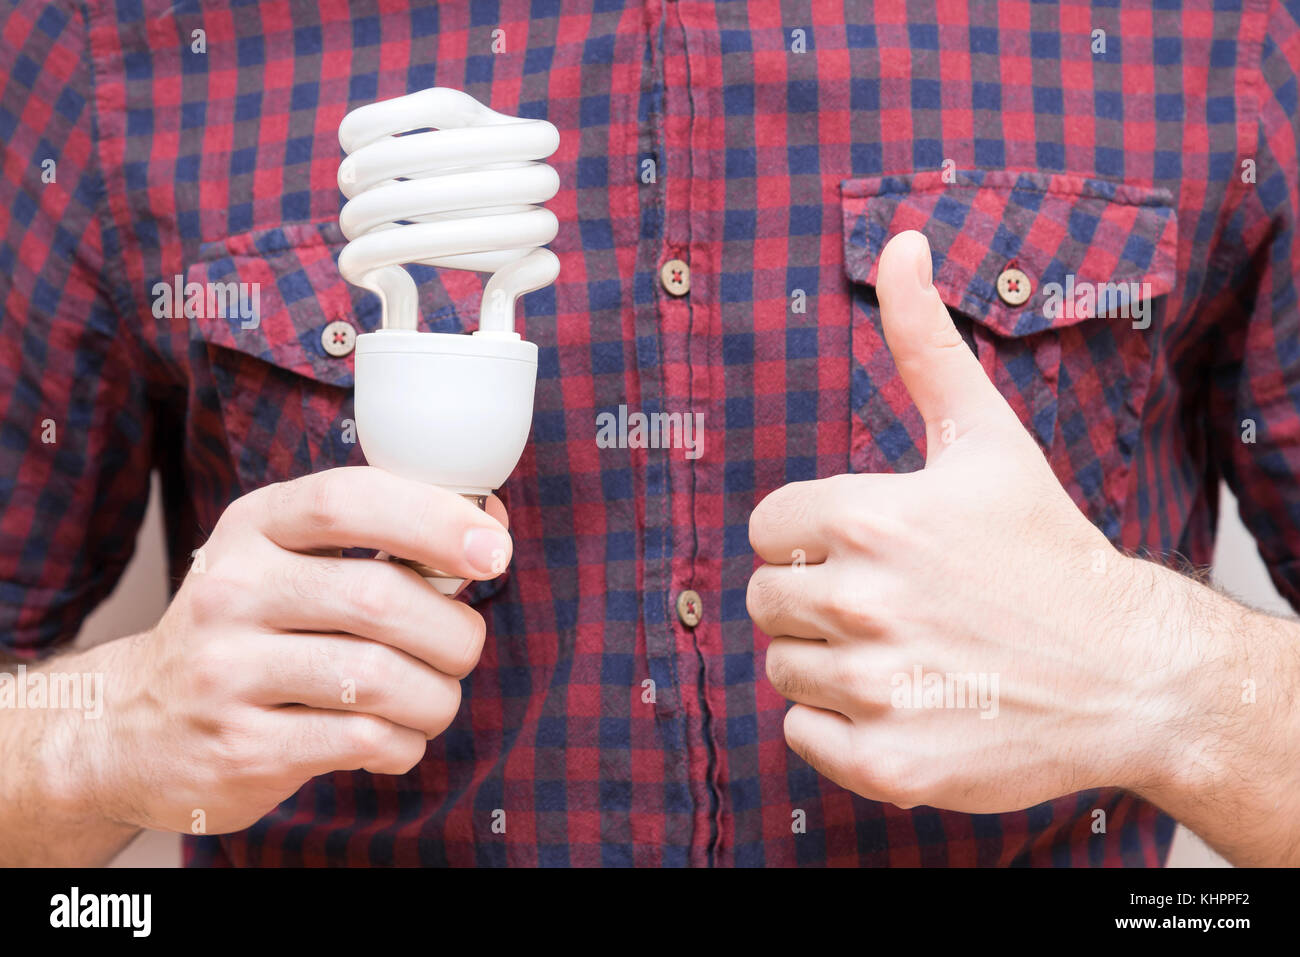 The man in the shirt is holding an energy-saving light bulb Stock Photo